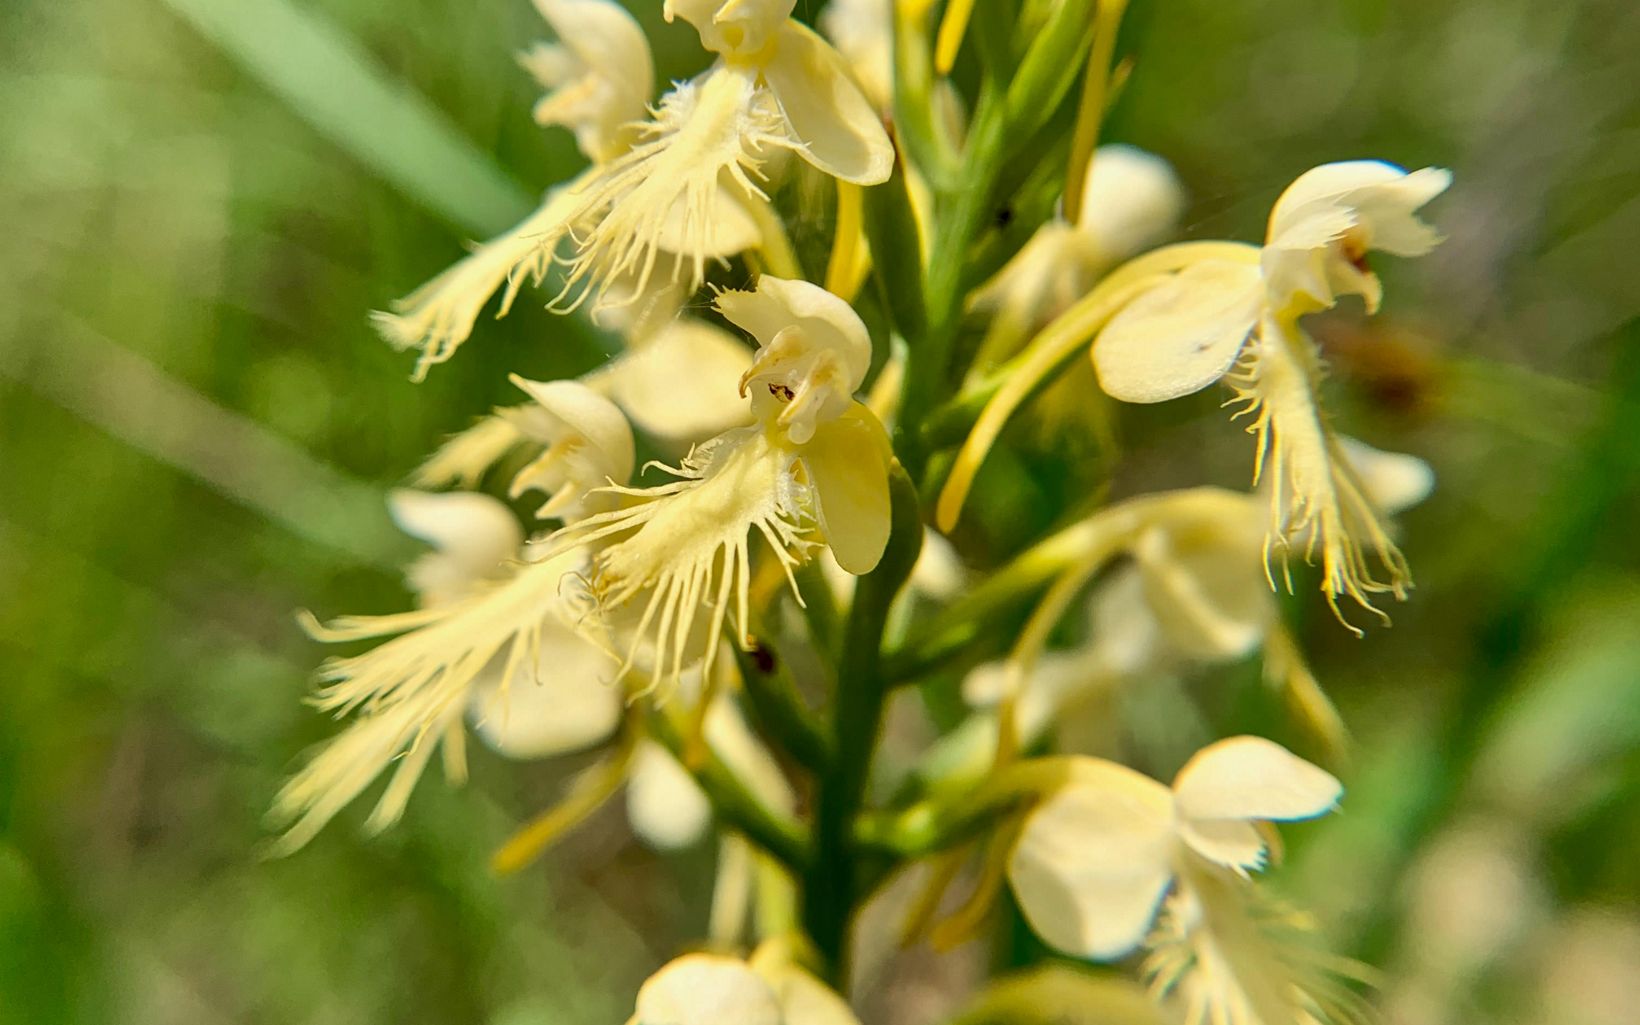 This hybrid displays characteristics of both the white-fringed and yellow-crested orchids.